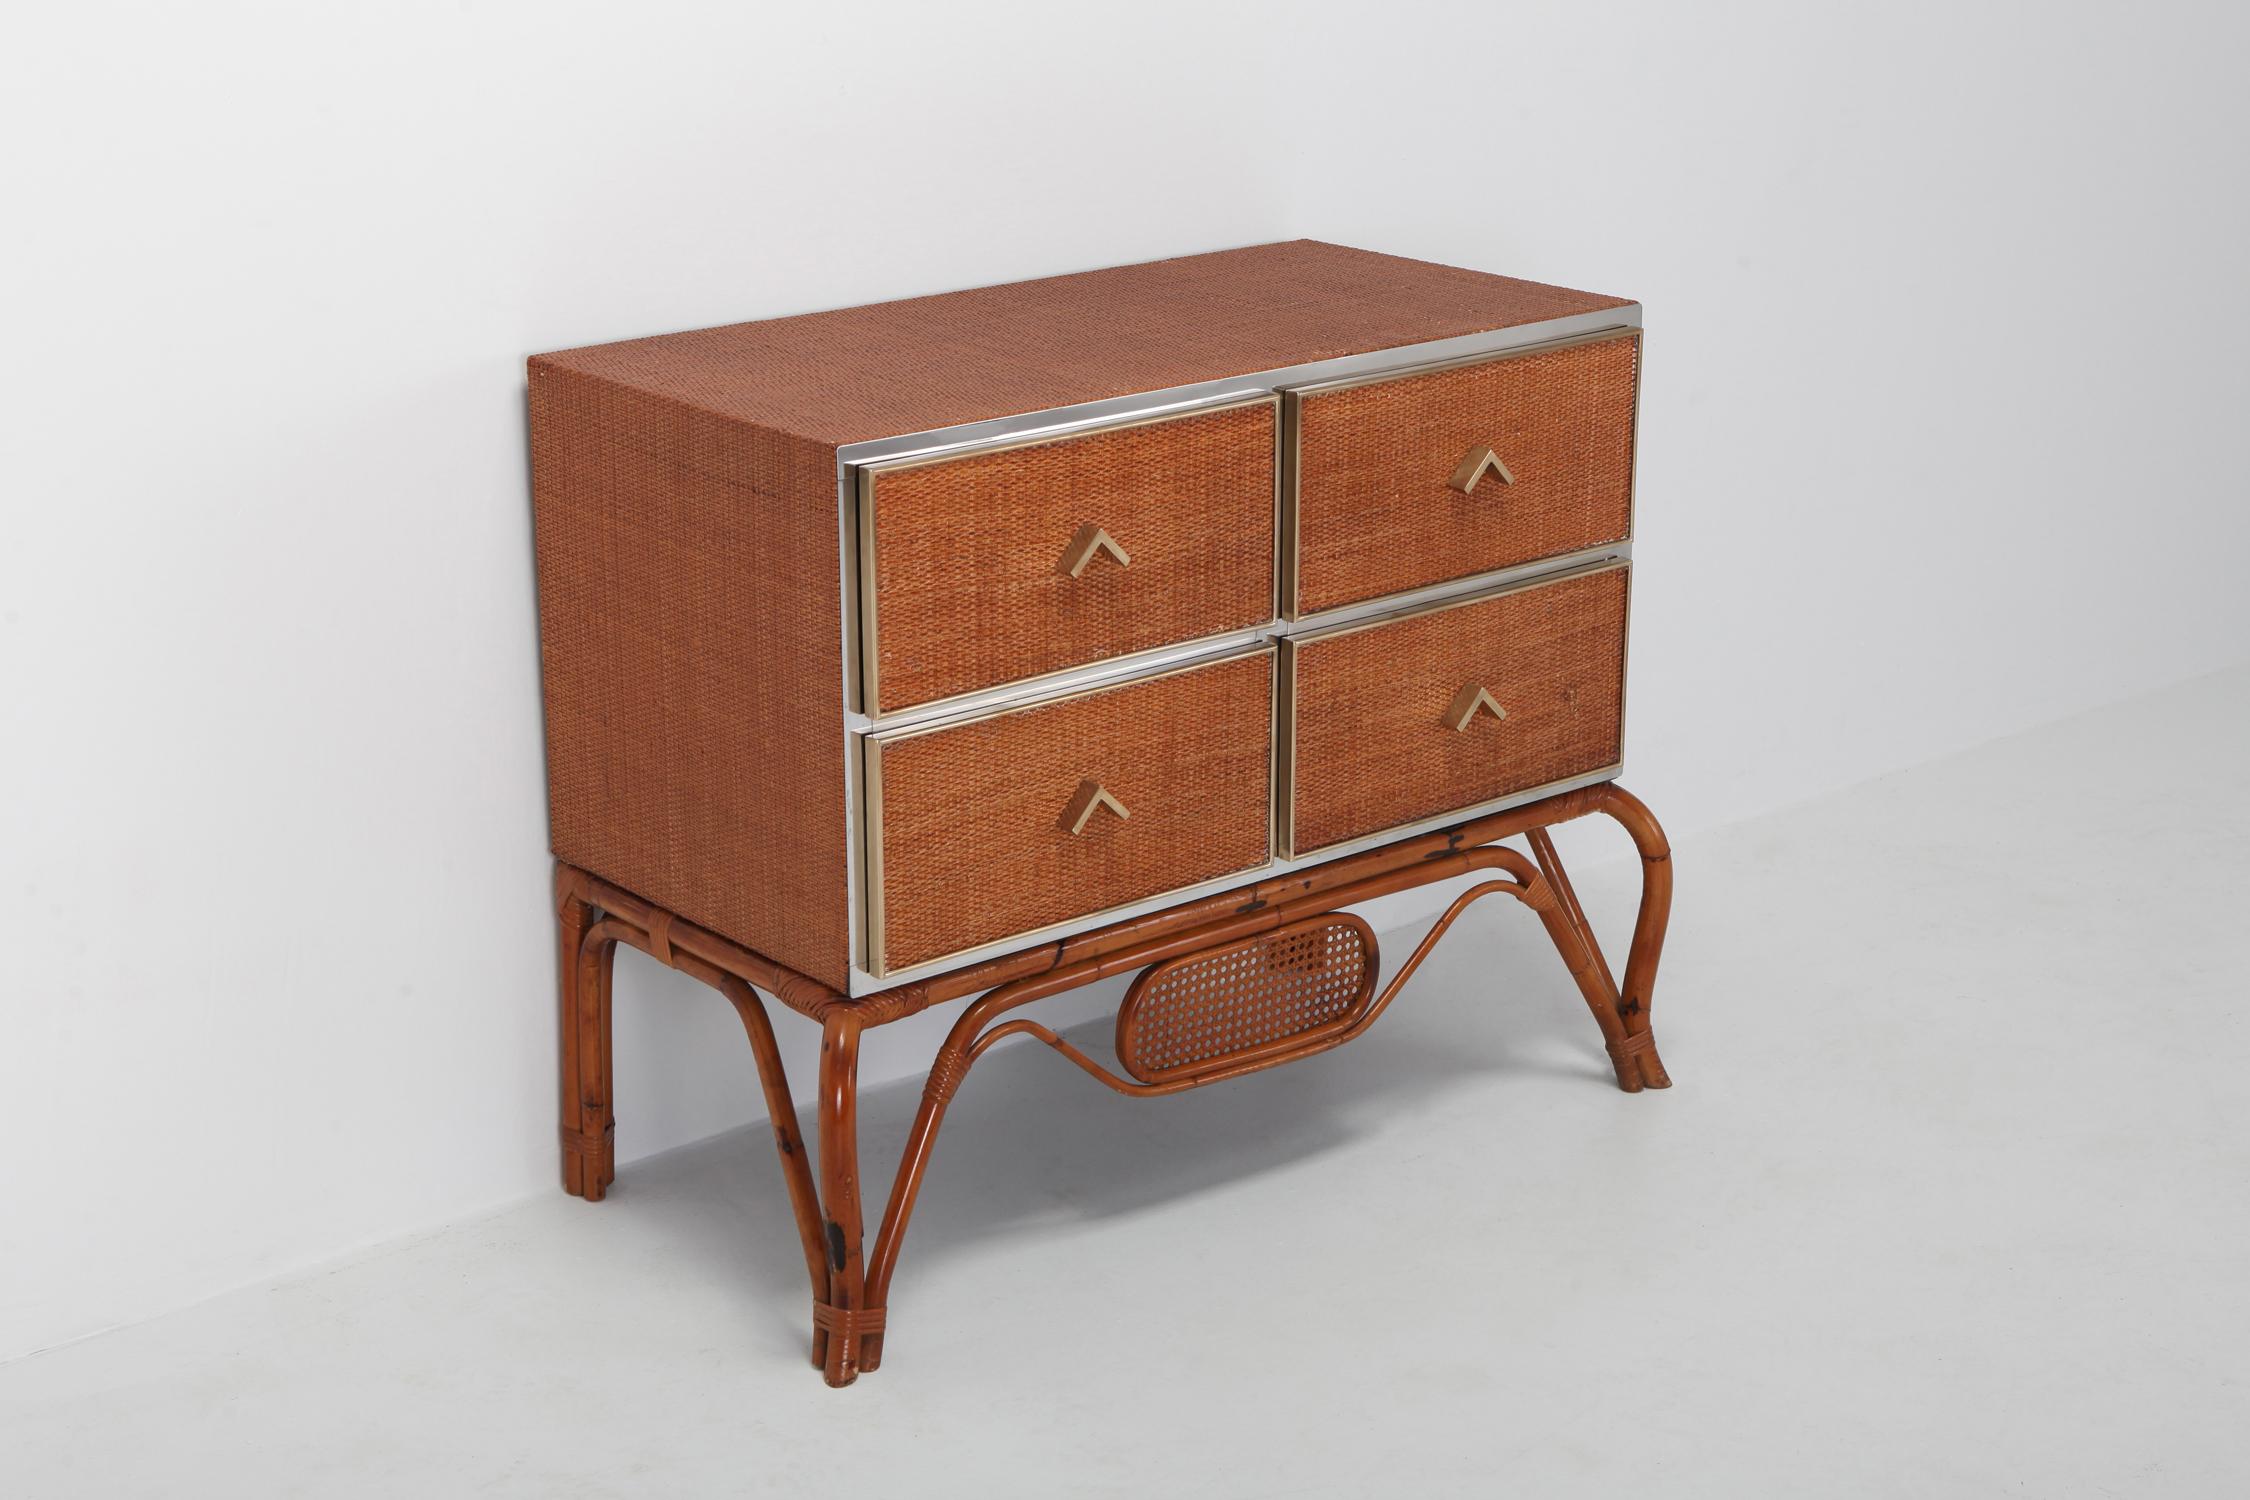 Hollywood Regency Crespi Style Commode in Rattan, Bamboo, Brass and Chrome by Vivai del Sud